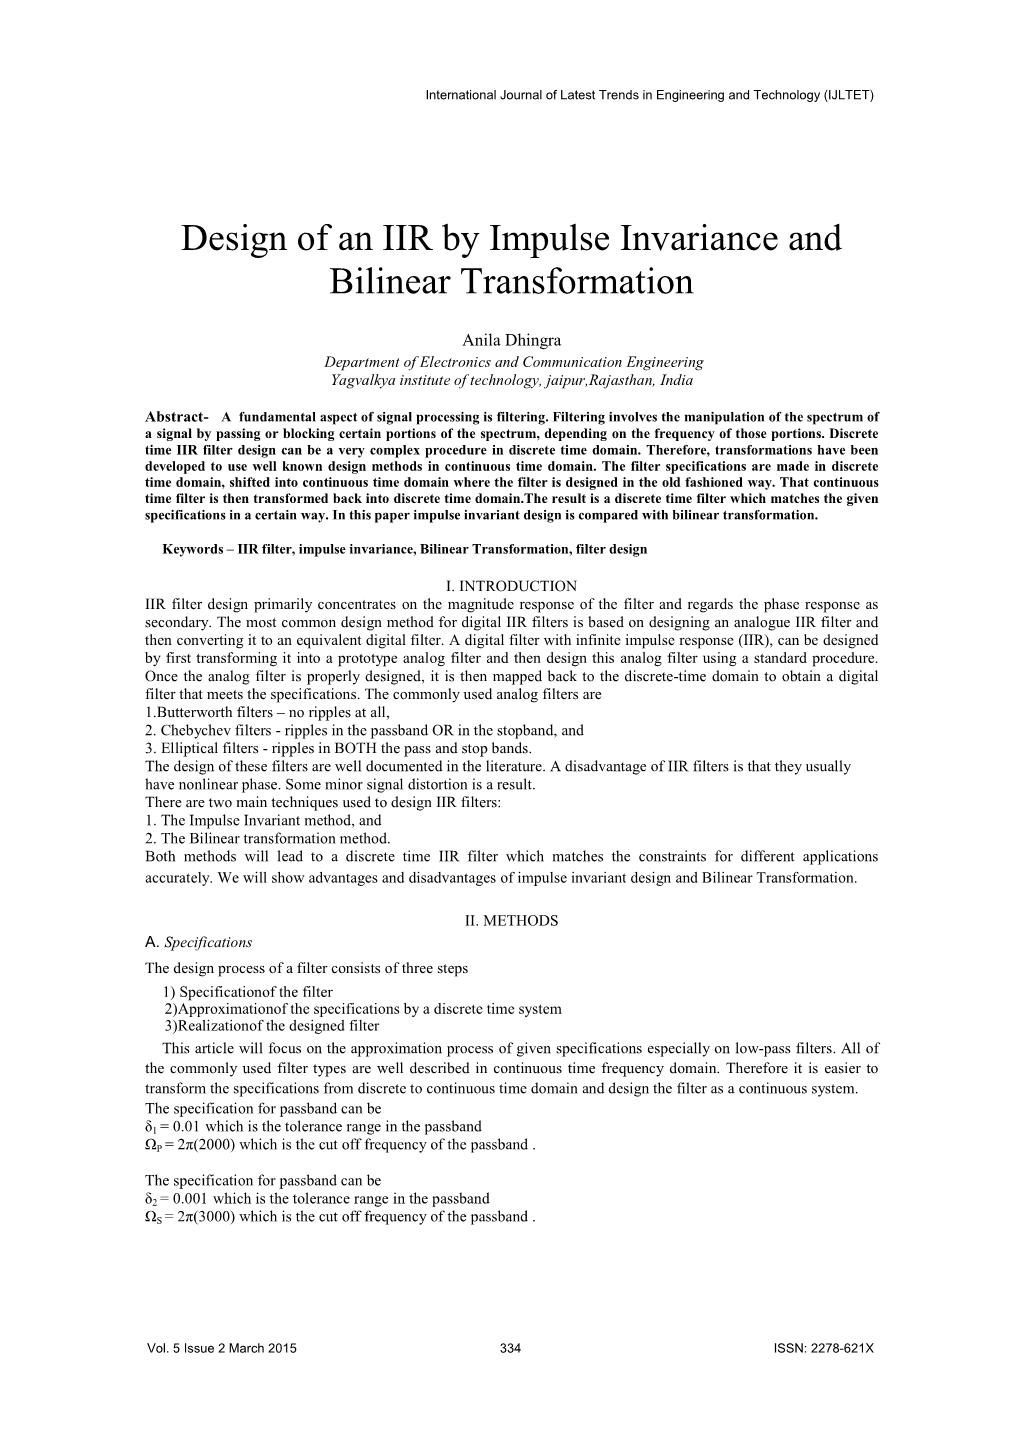 Design of an IIR by Impulse Invariance and Bilinear Transformation